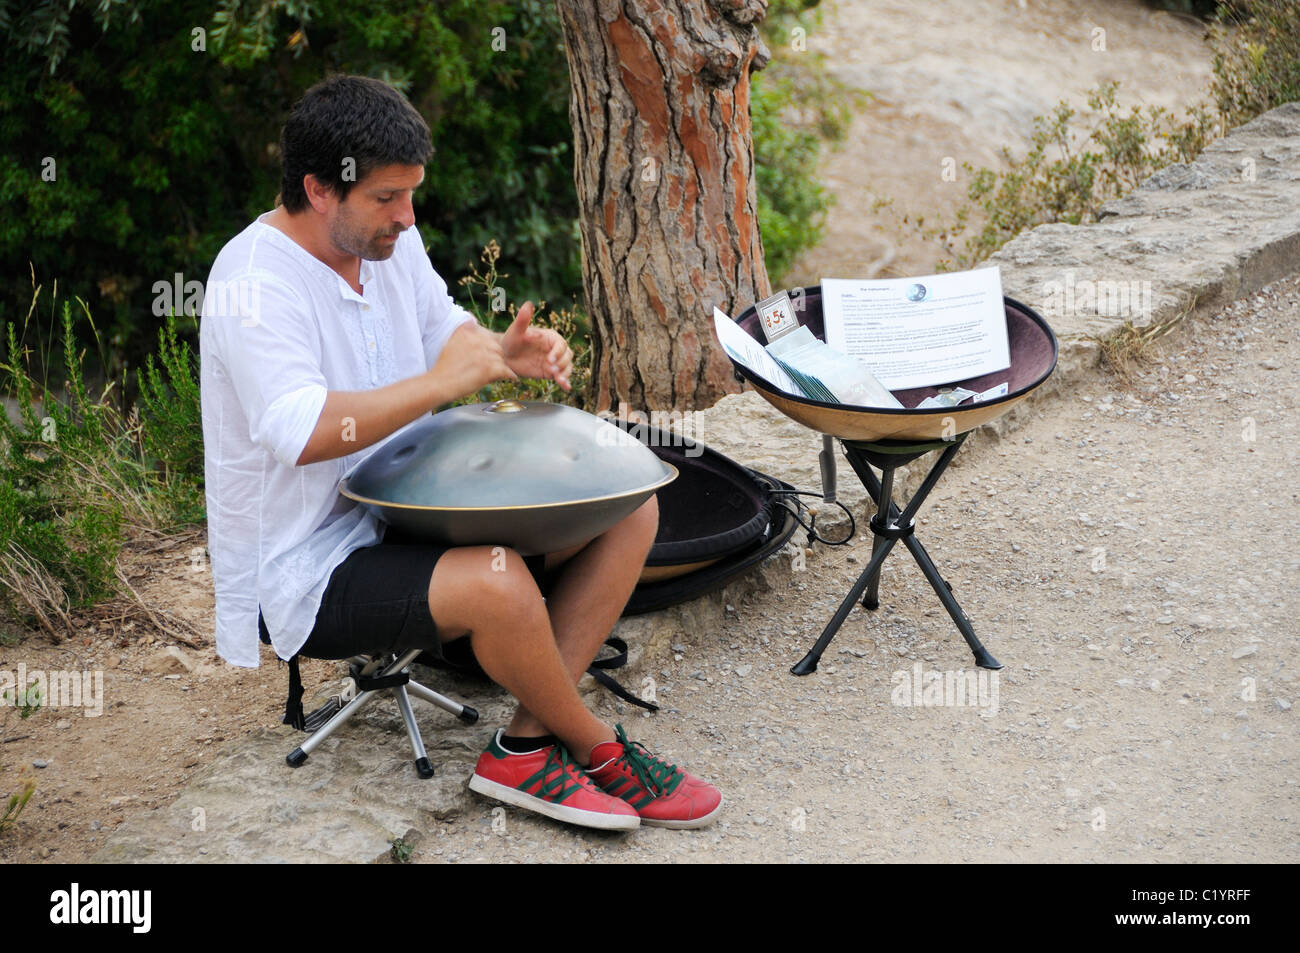 A musician playing his hang (Swiss made metal music instrument) in Parc Guell, Barcelona, Spain. Stock Photo